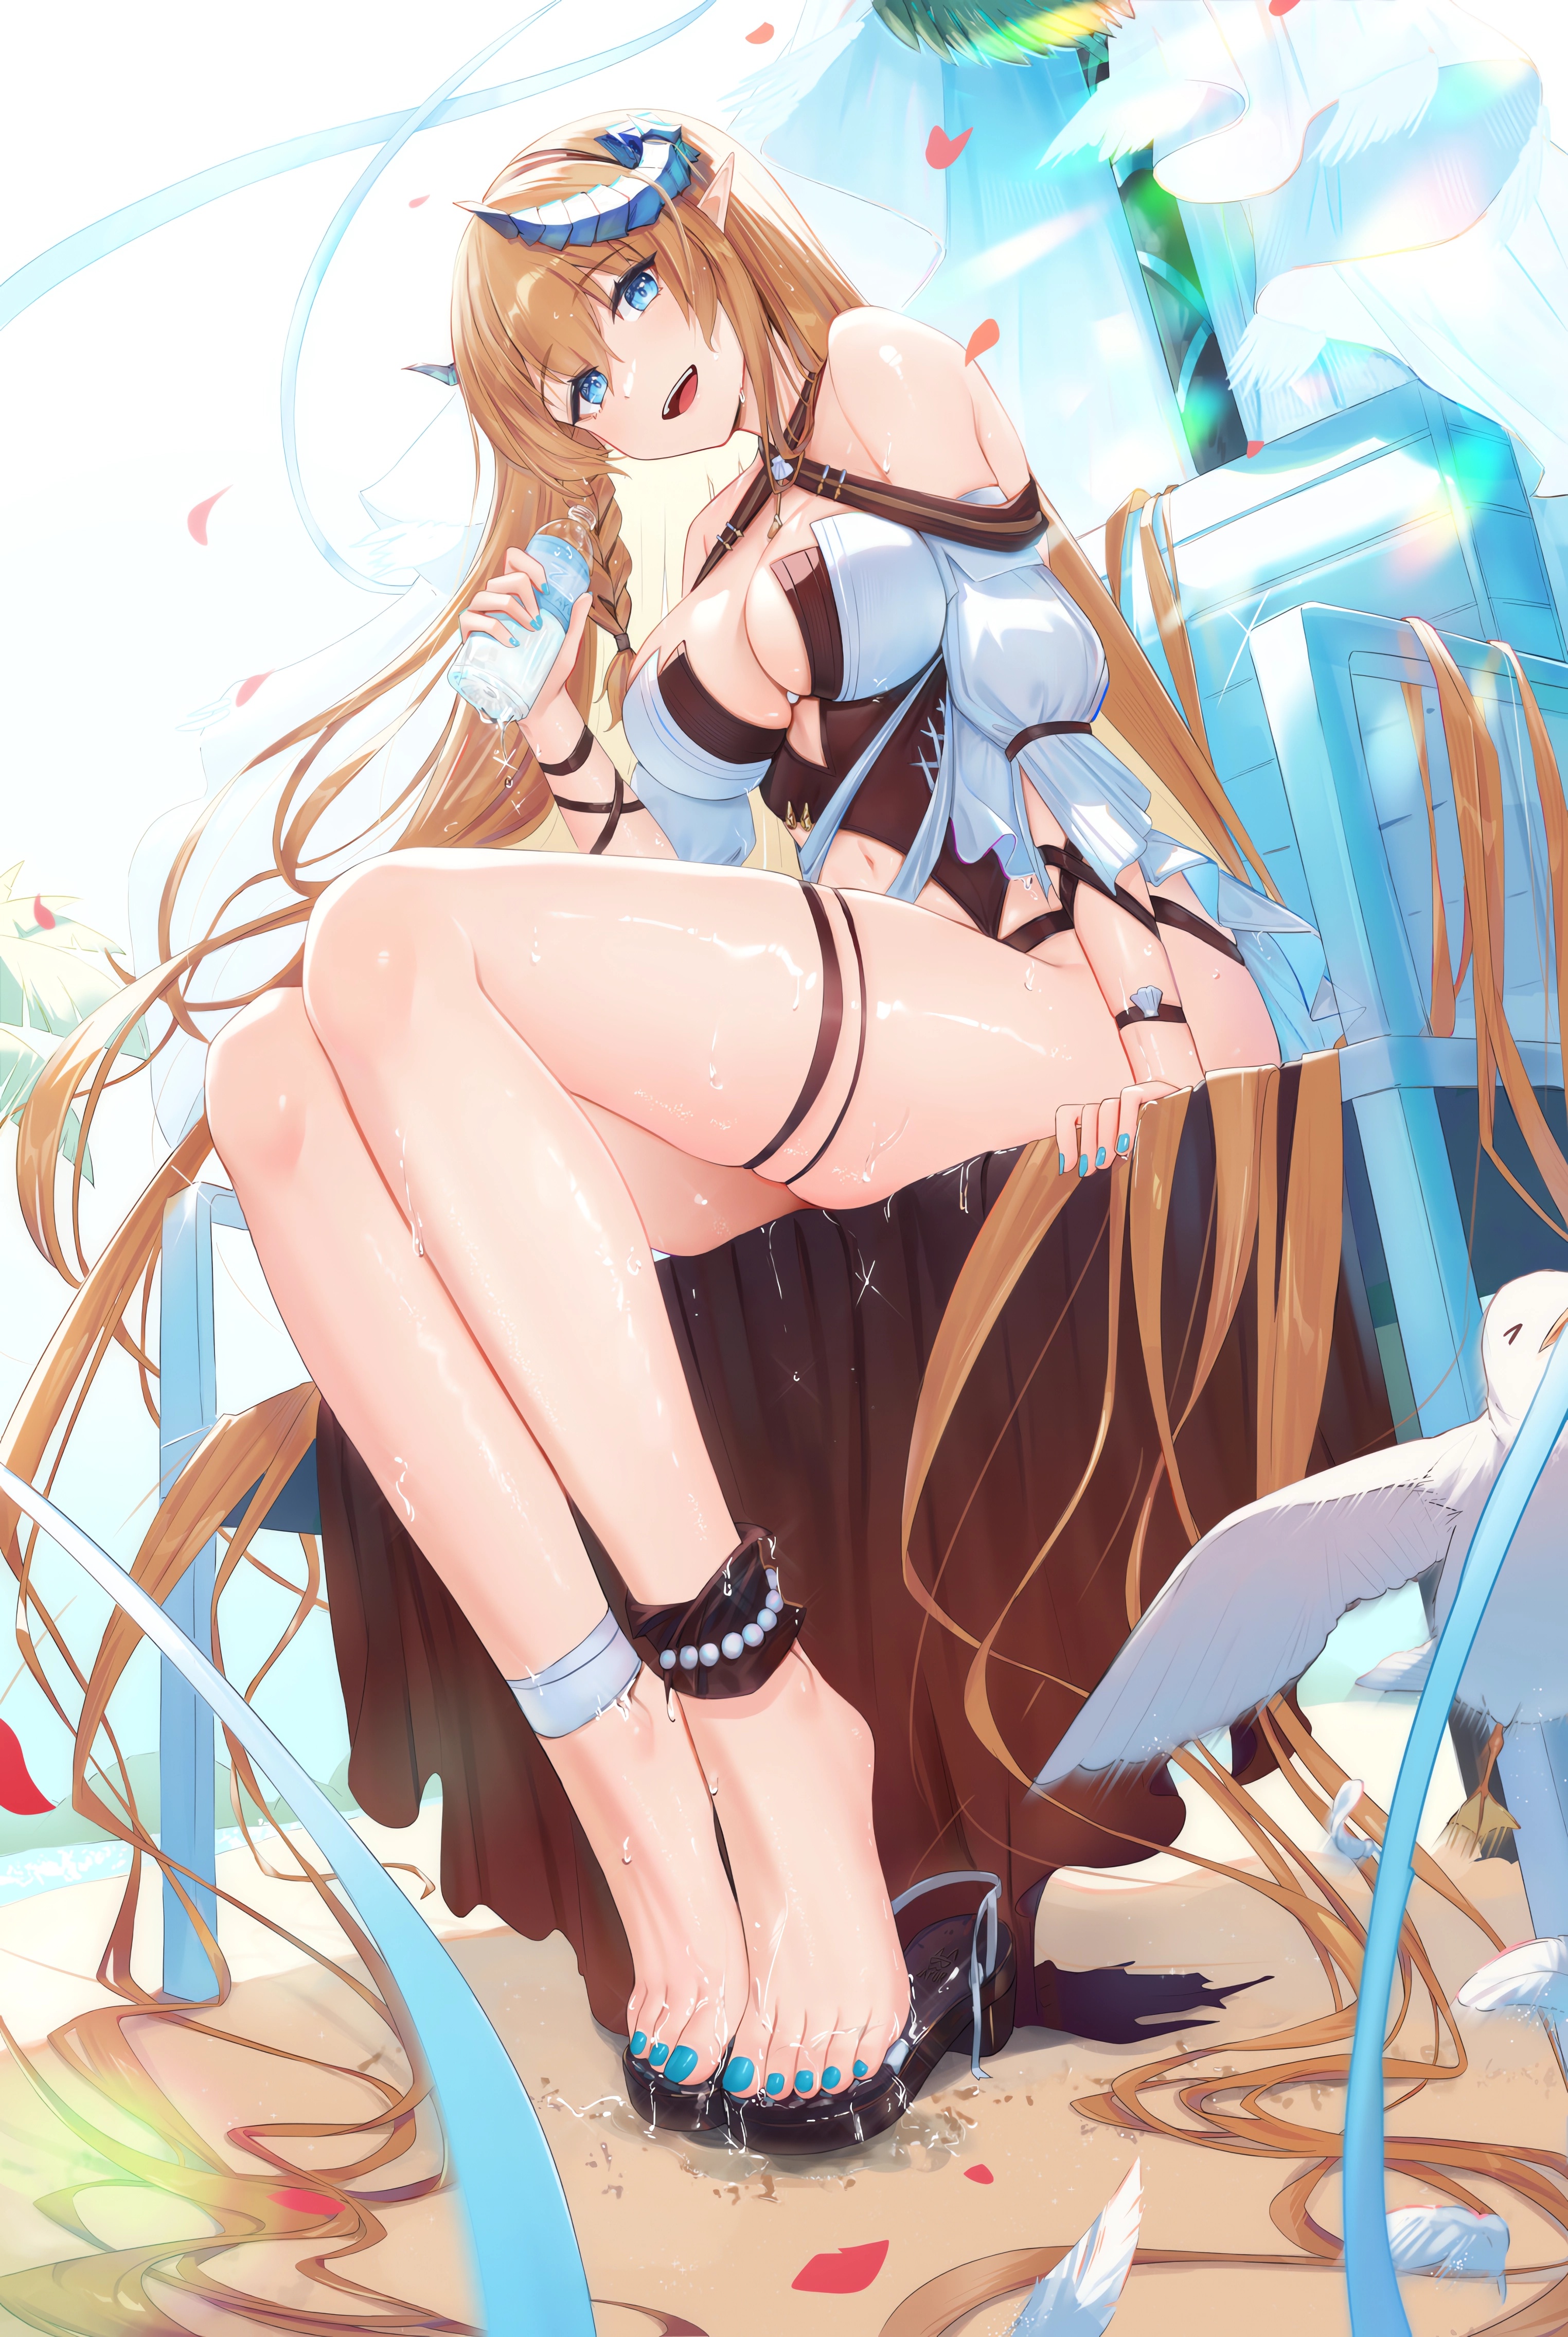 Anime 3048x4542 anime anime girls big boobs Arknights Saileach(Arknights) sitting feet looking at viewer blonde water bottle open mouth blue eyes horns petals wet braids portrait display long hair wet body